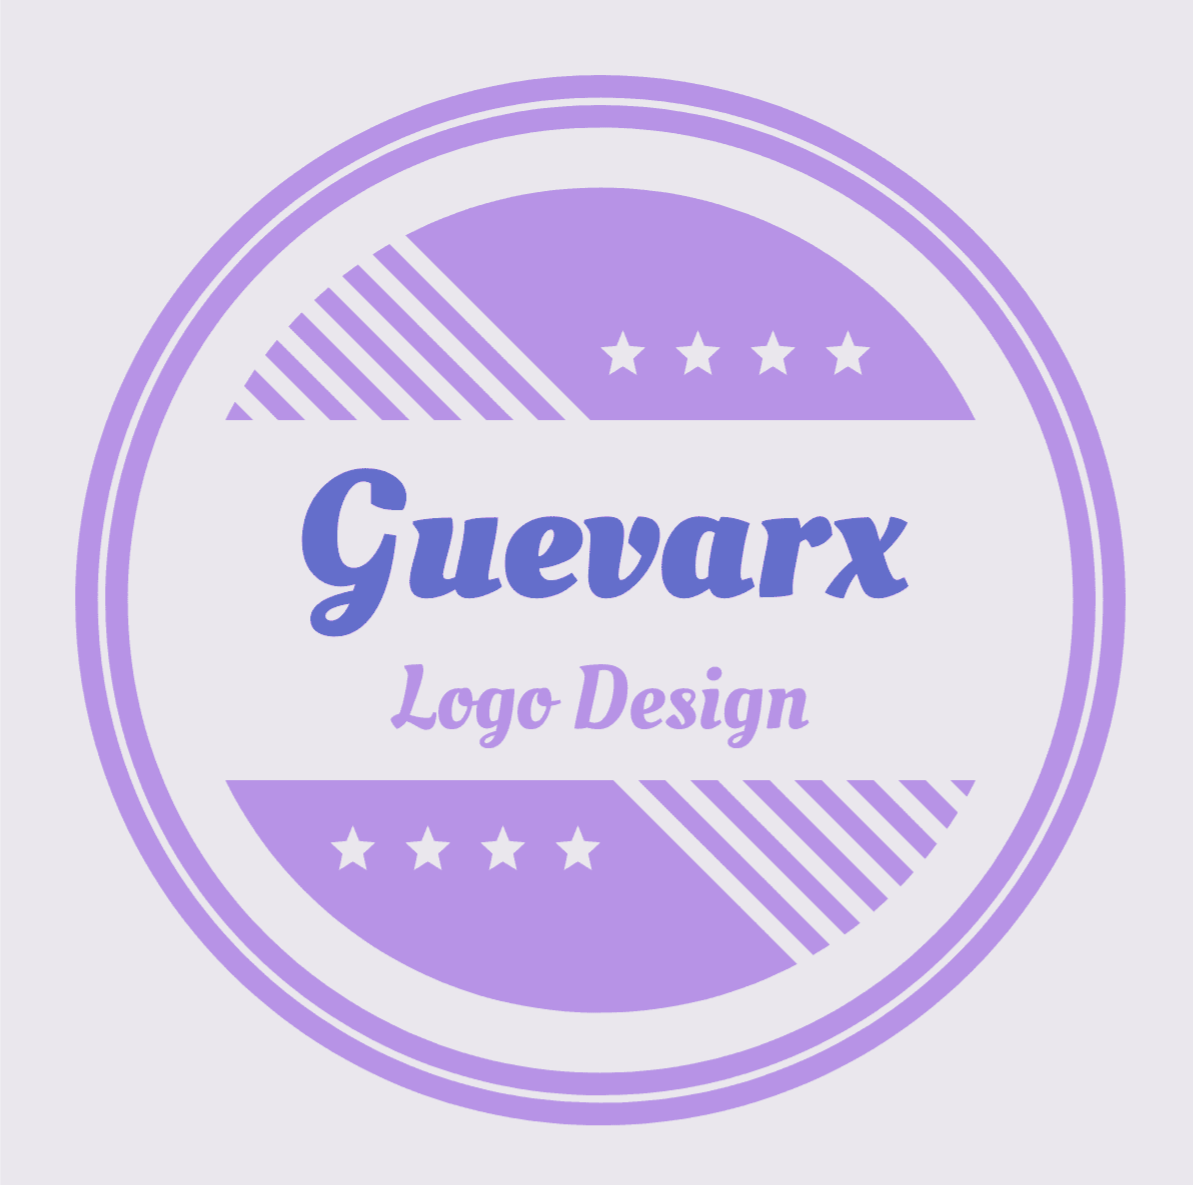 Simple and professional logo design, fast and cheap. for $5 - SEOClerks